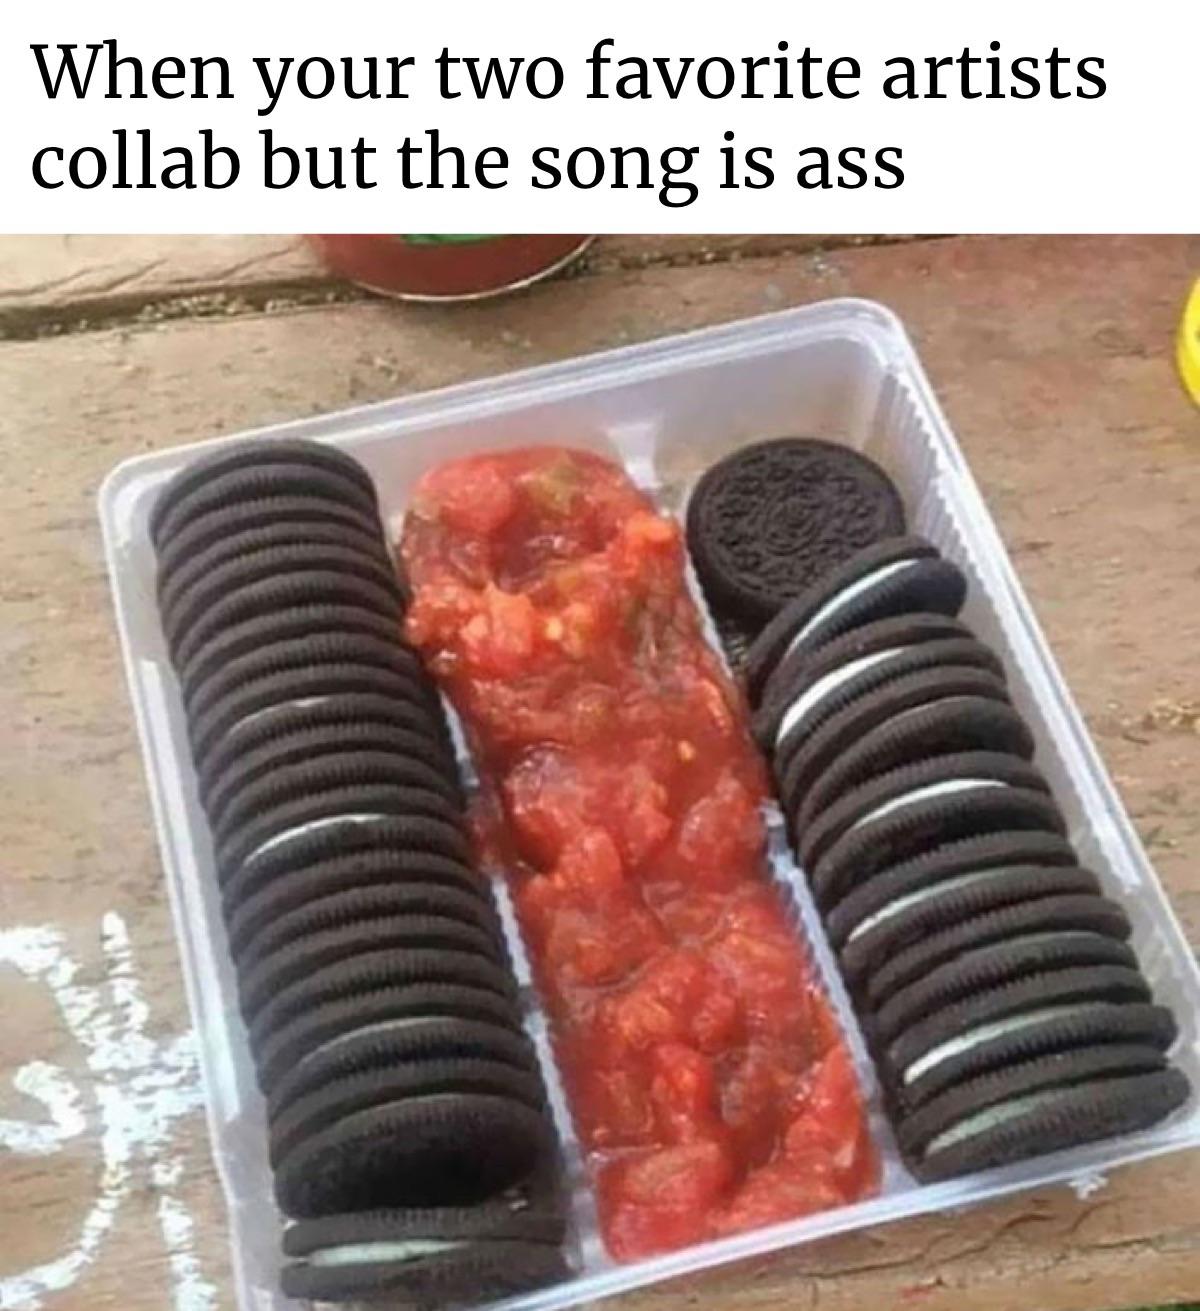 monday morning randomness - oreos and salsa meme - When your two favorite artists collab but the song is ass Una